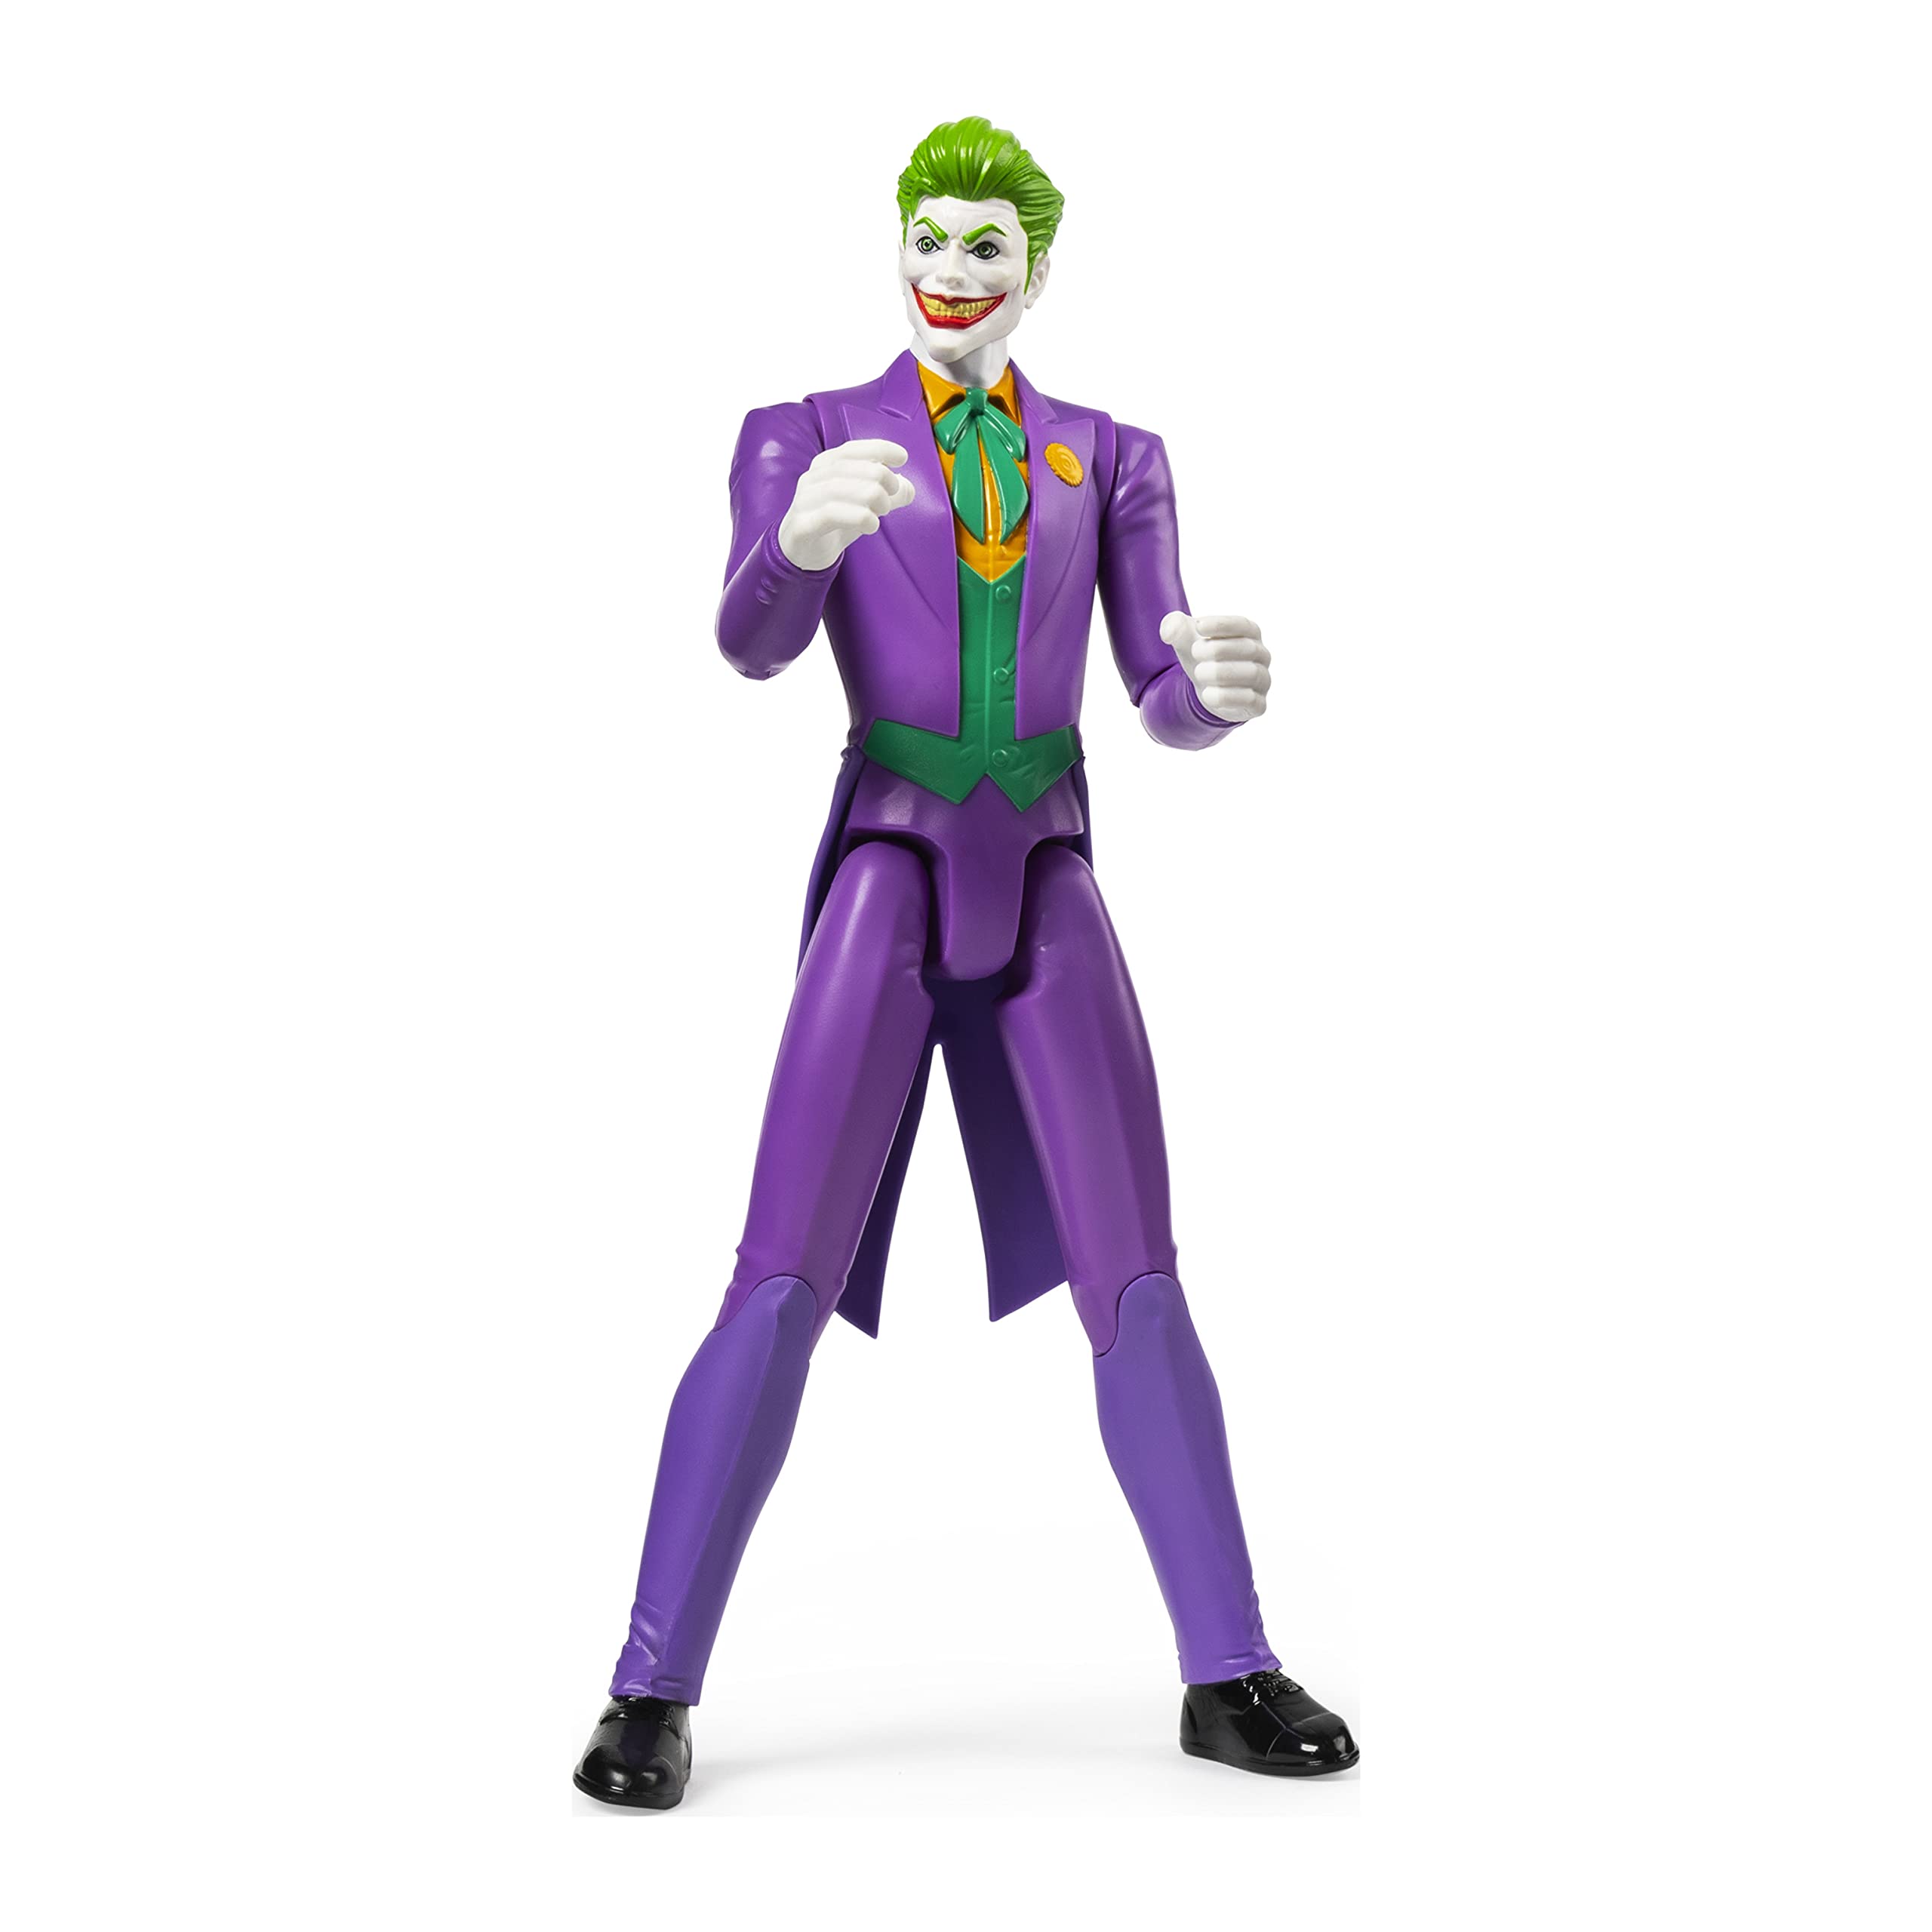 DC Comics, 12-inch The Joker Action Figure, Kids Toys for Boys and Girls Ages 3 and Up